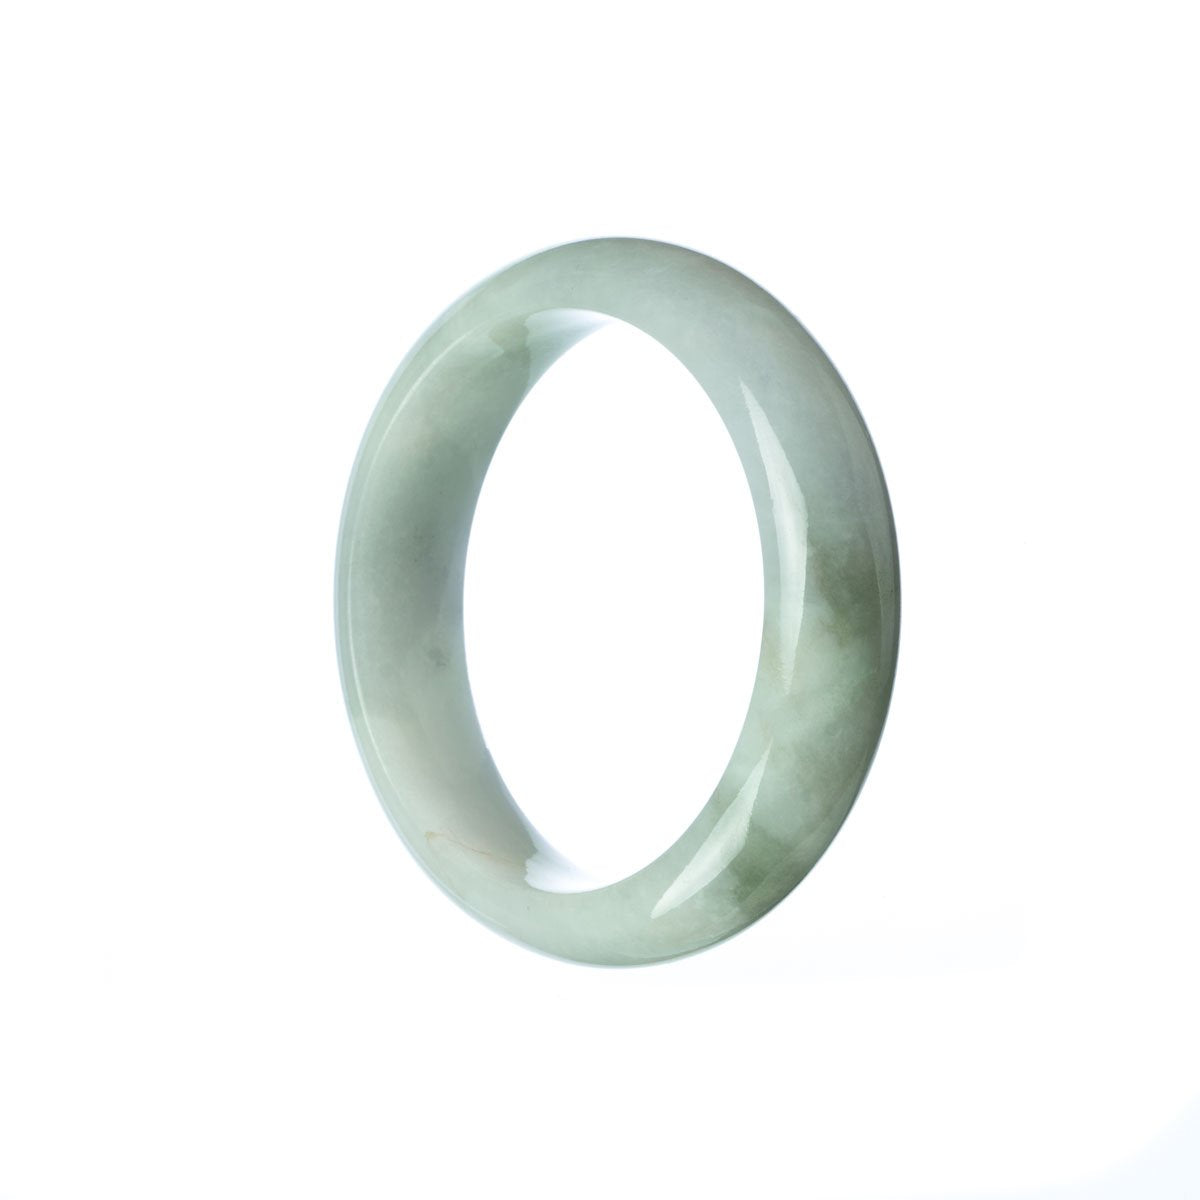 A half-moon shaped untreated pale green jadeite bangle designed for children, sourced from MAYS GEMS.